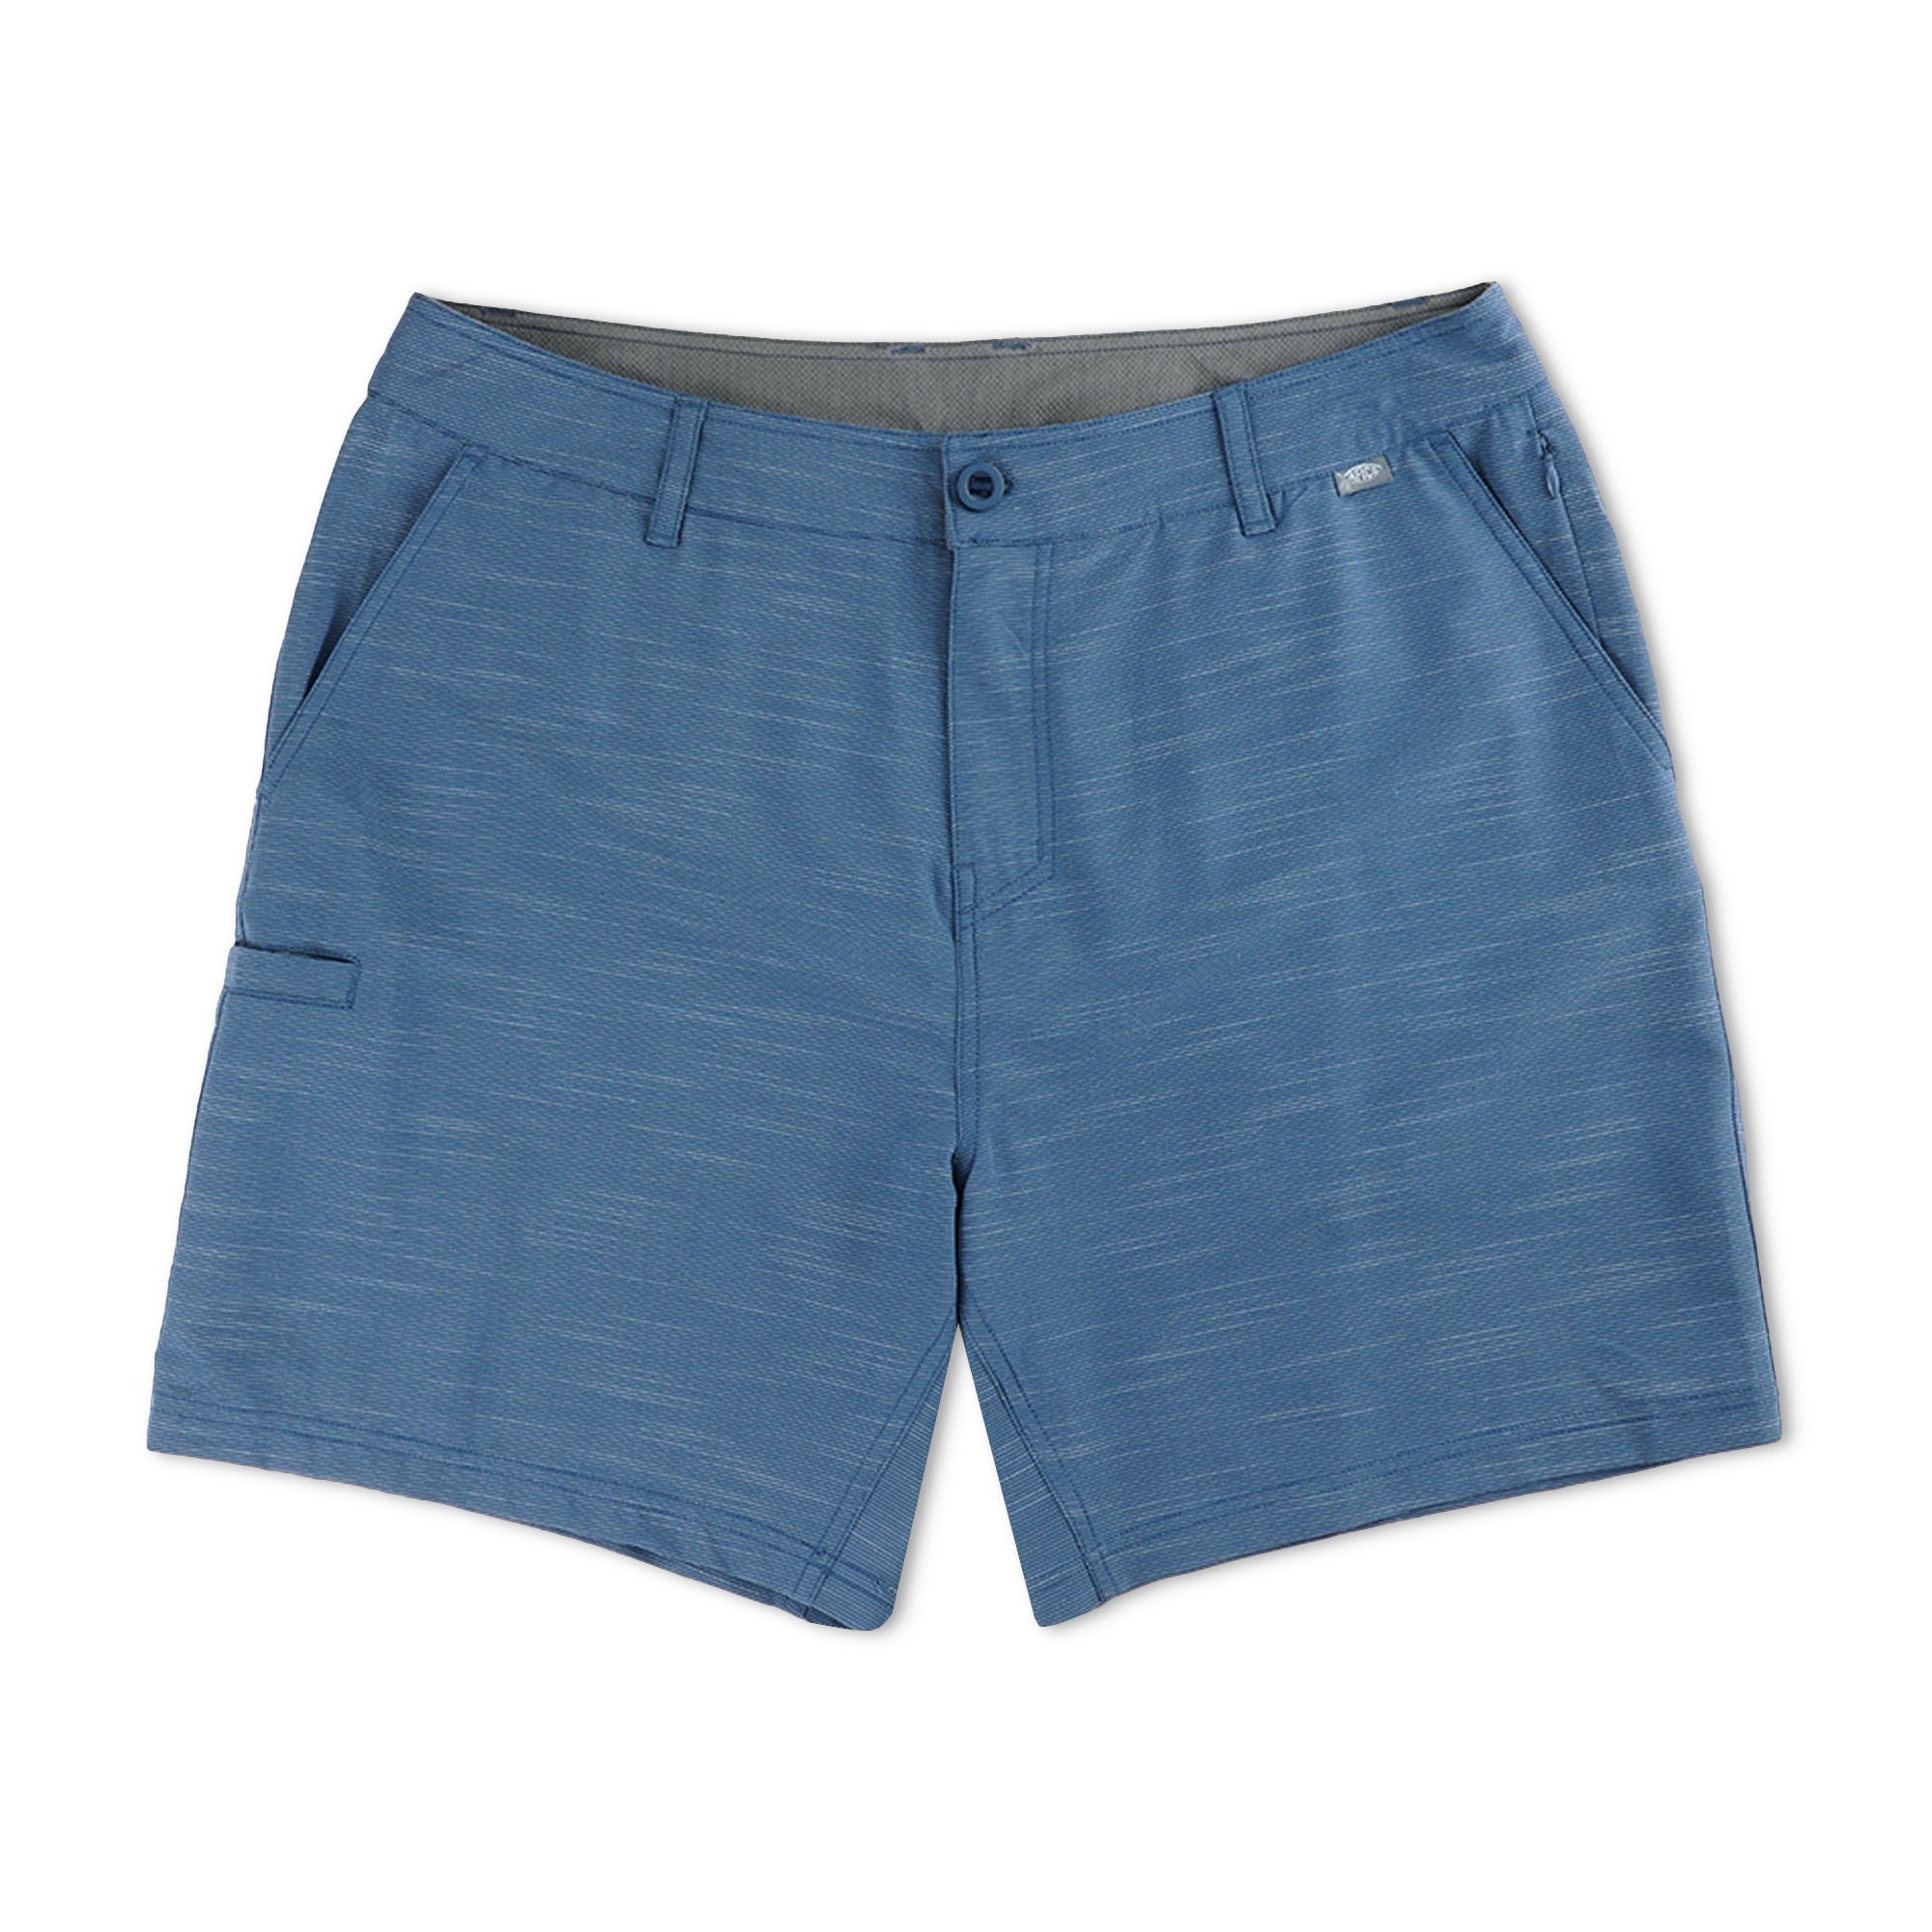 AFTCO 365 Hybrid Chino Shorts for Men - Bering Sea - 36